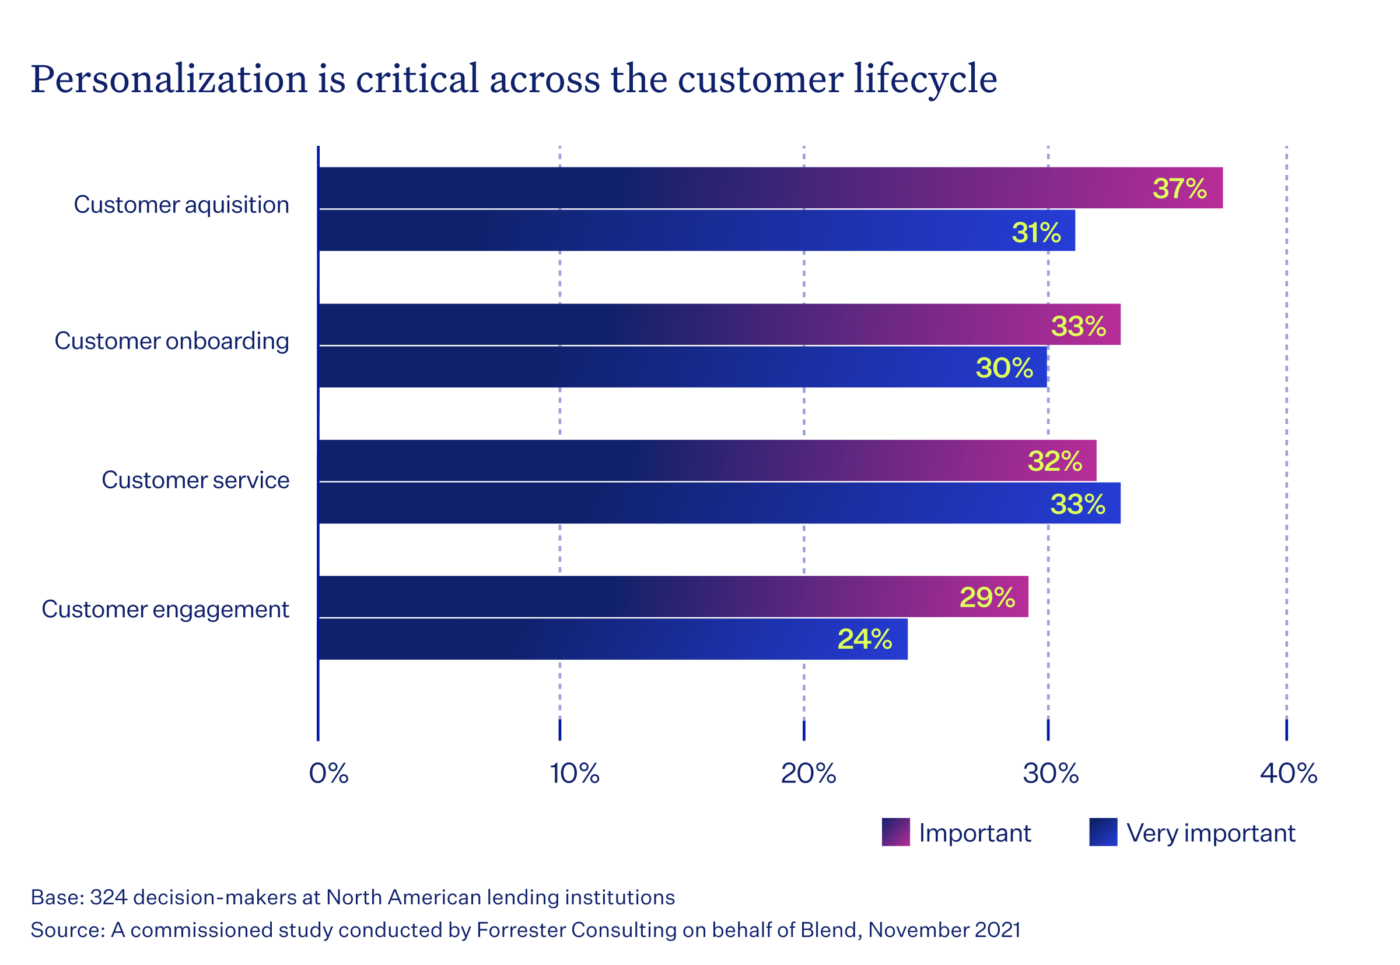 Chart showing how personalization is critical across the customer lifecycle